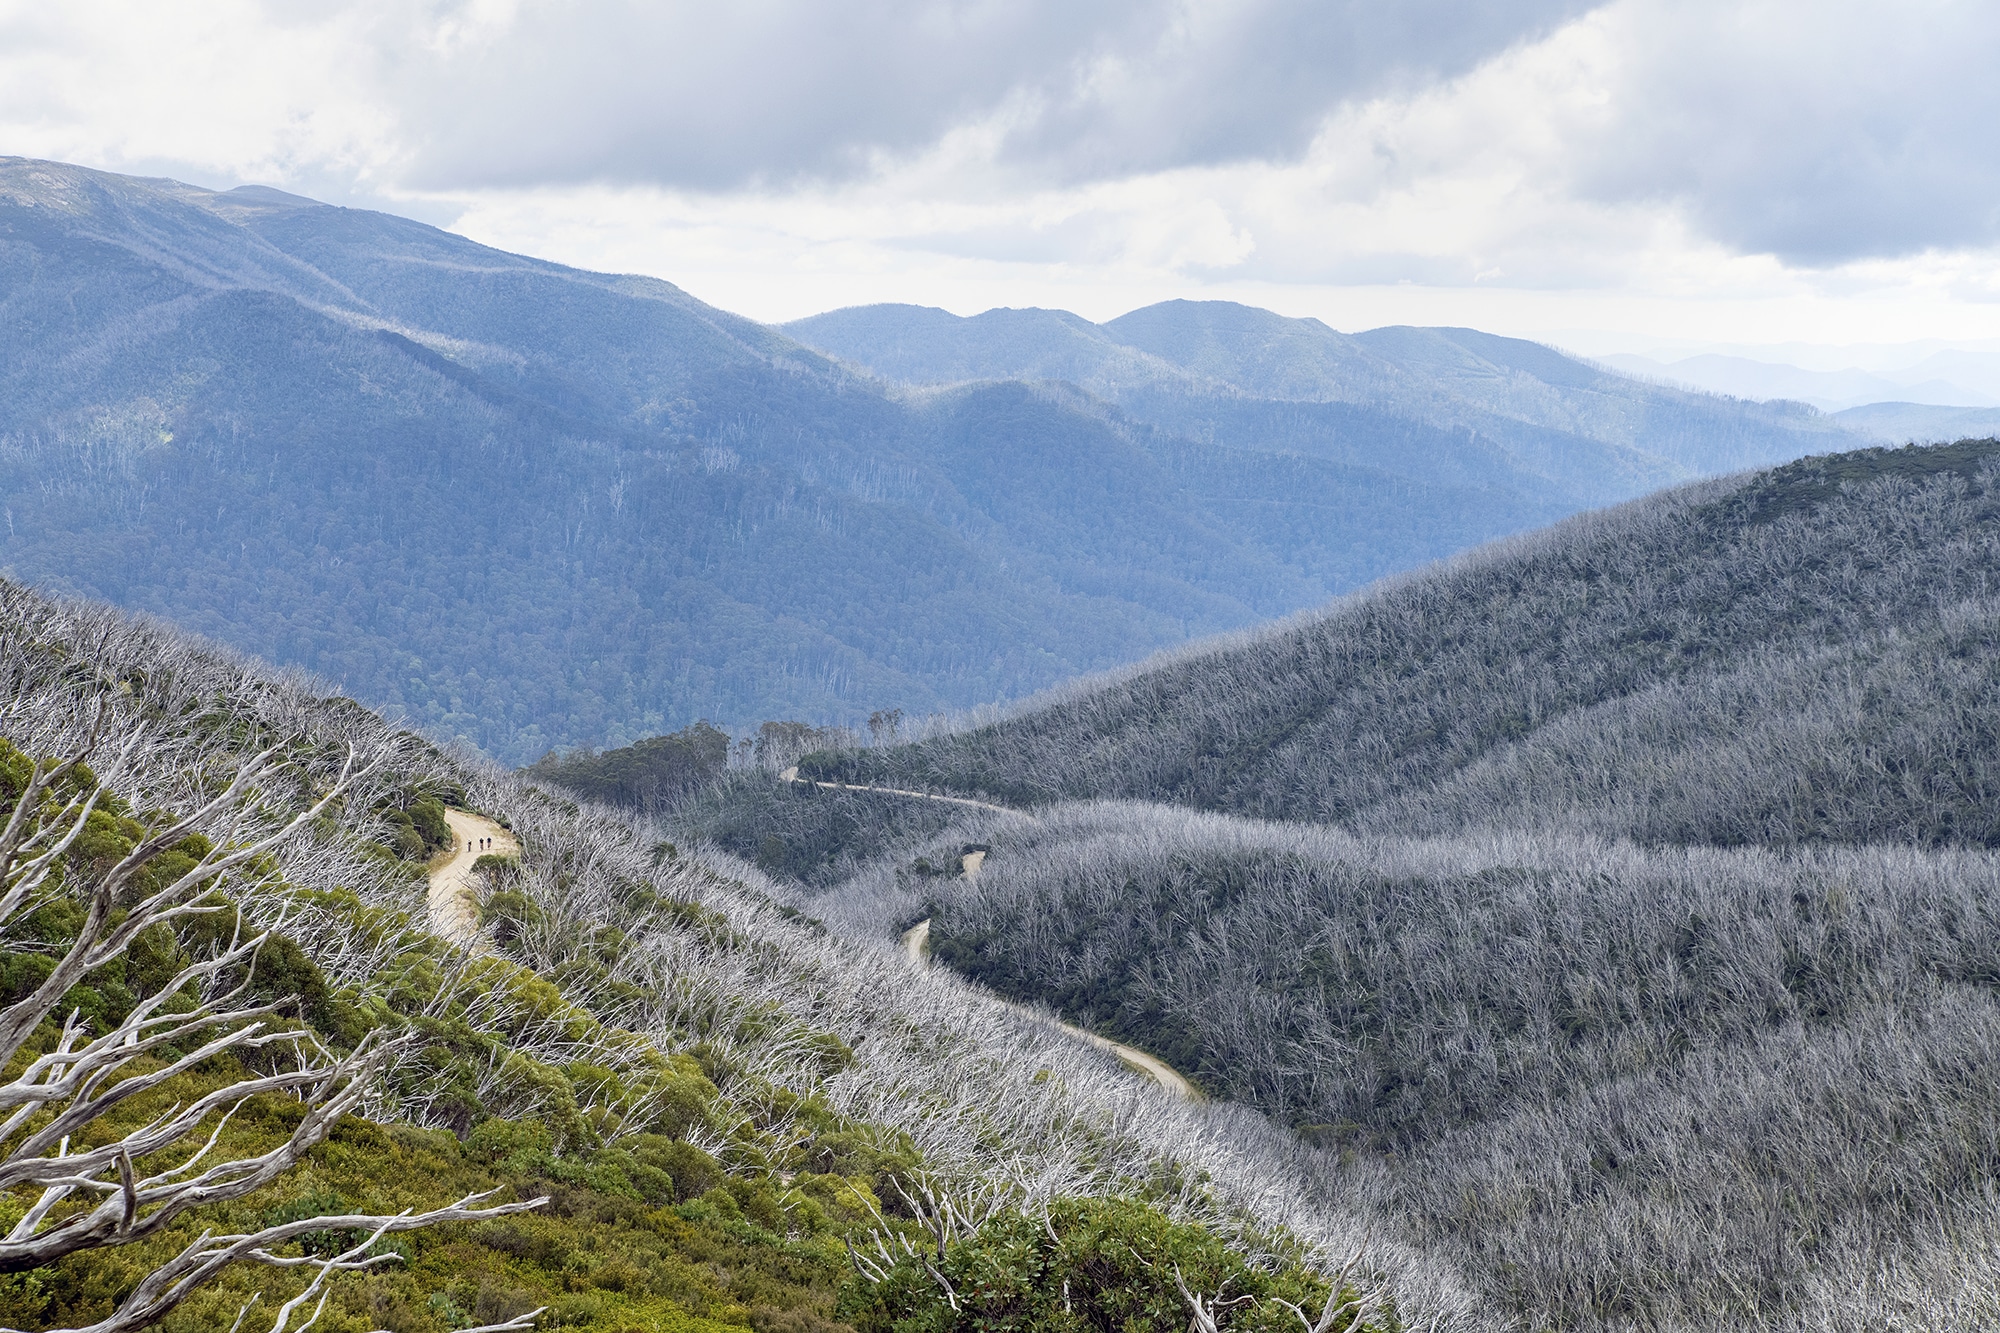 Forest and Mountain - Victoria's High Country